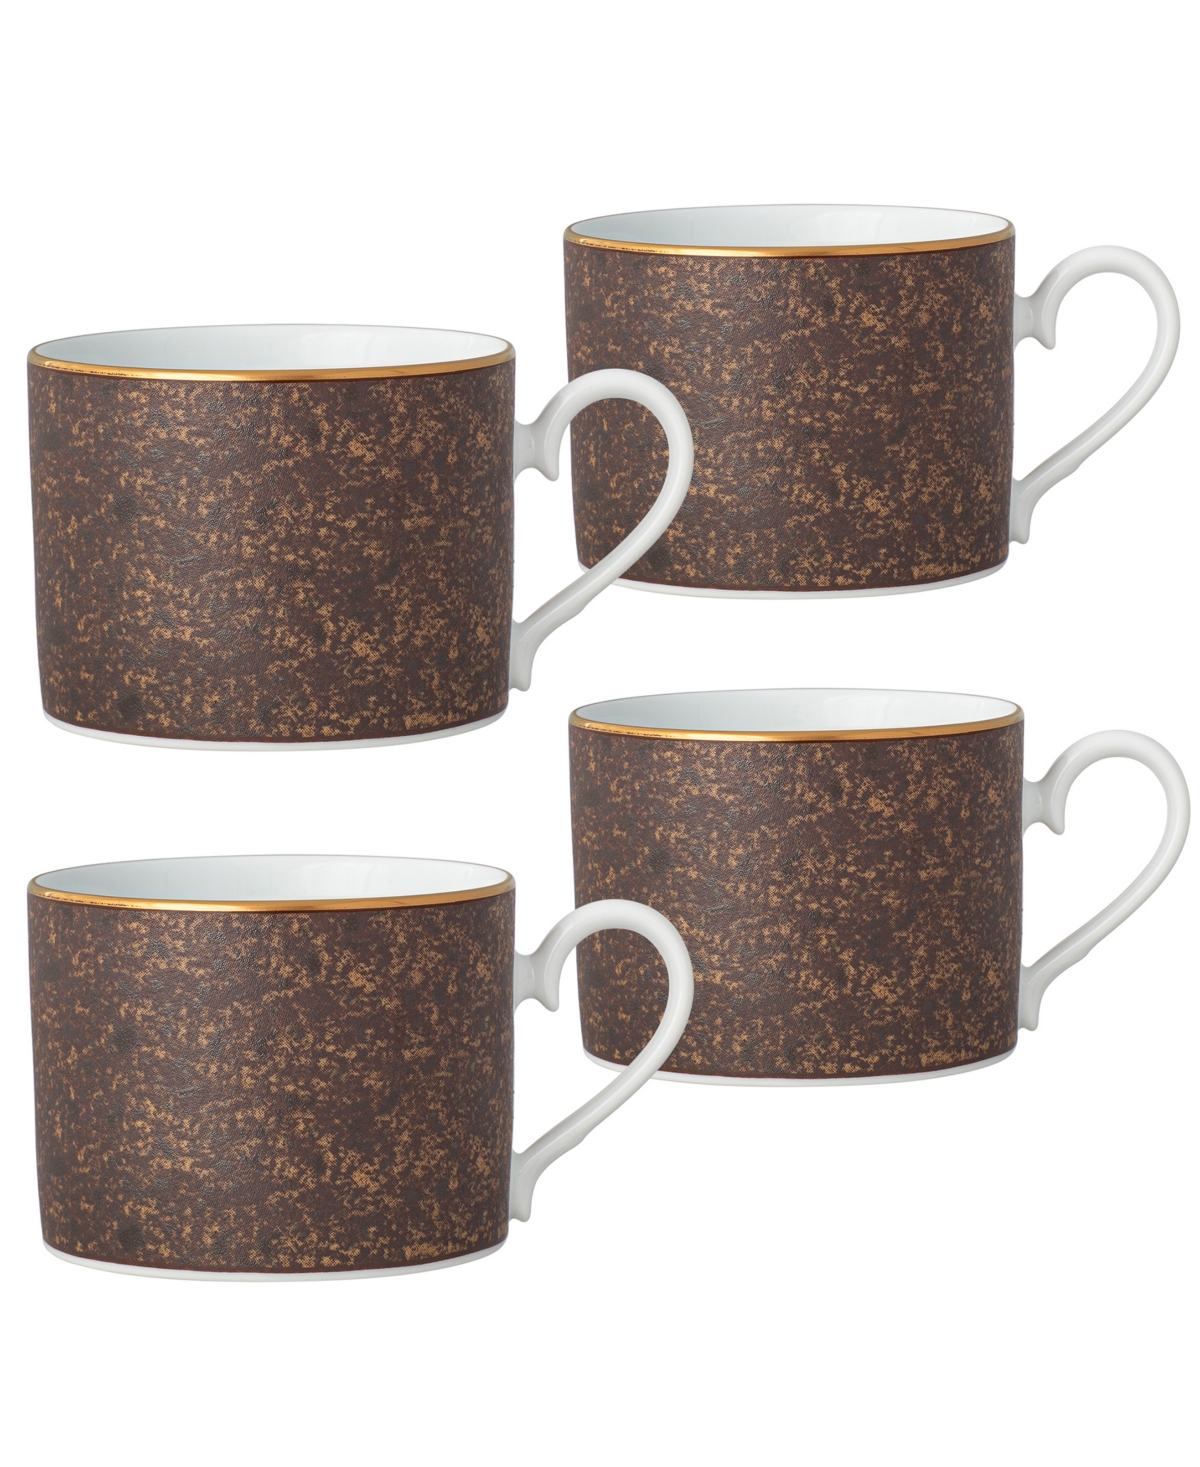 Noritake Tozan 4 Piece Cup Set, Service For 4 In Brown